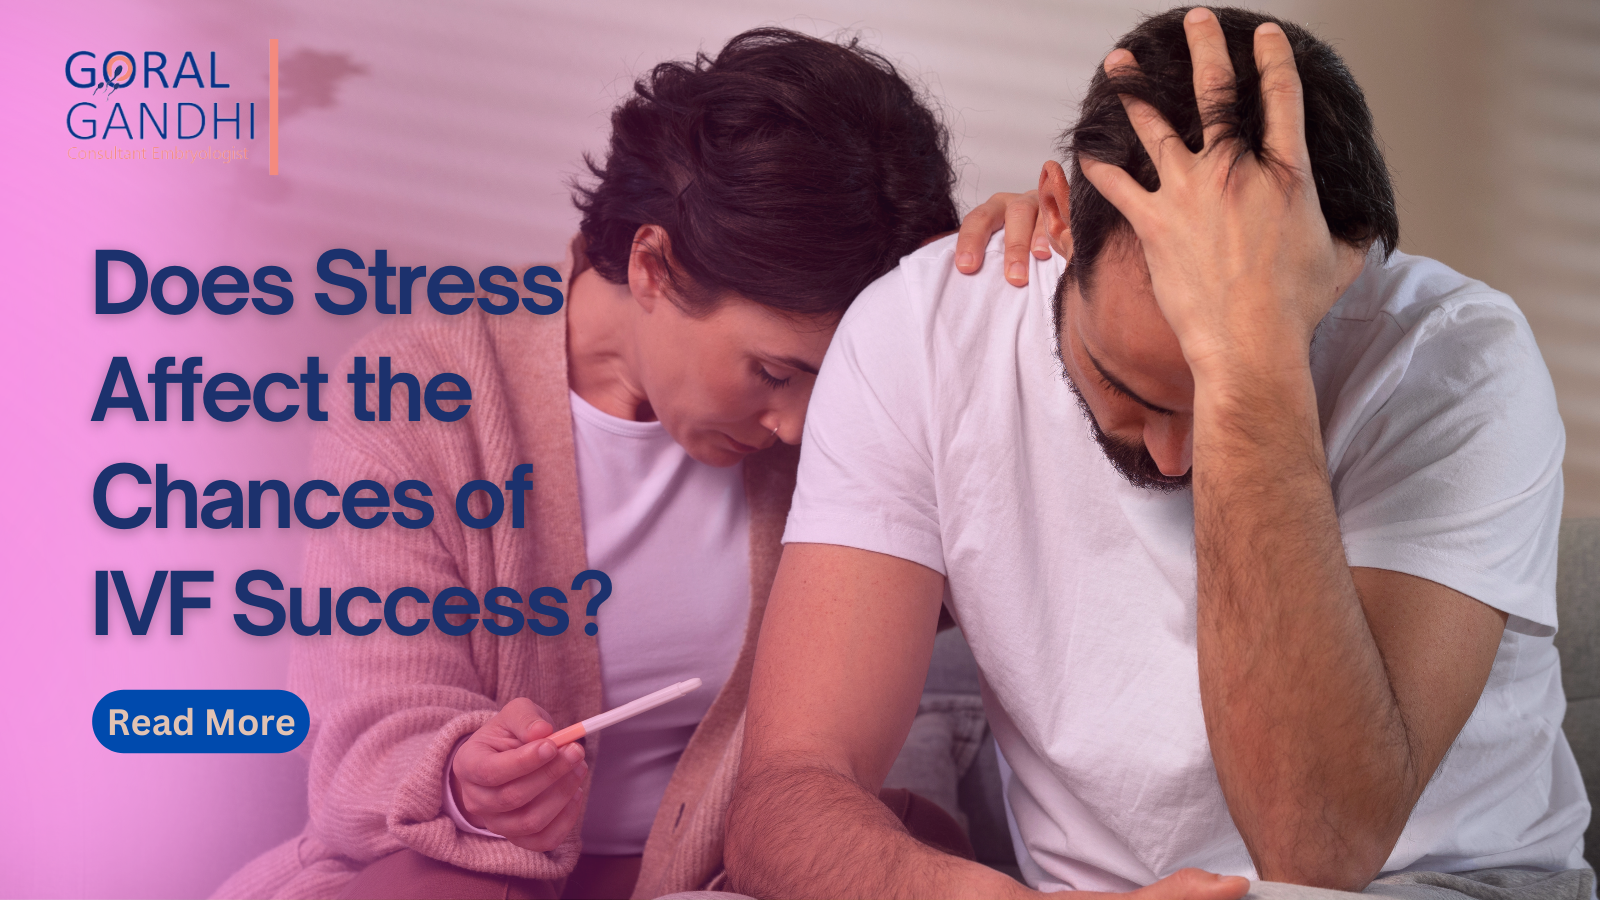 Does Stress Affect the Chances of IVF Success?